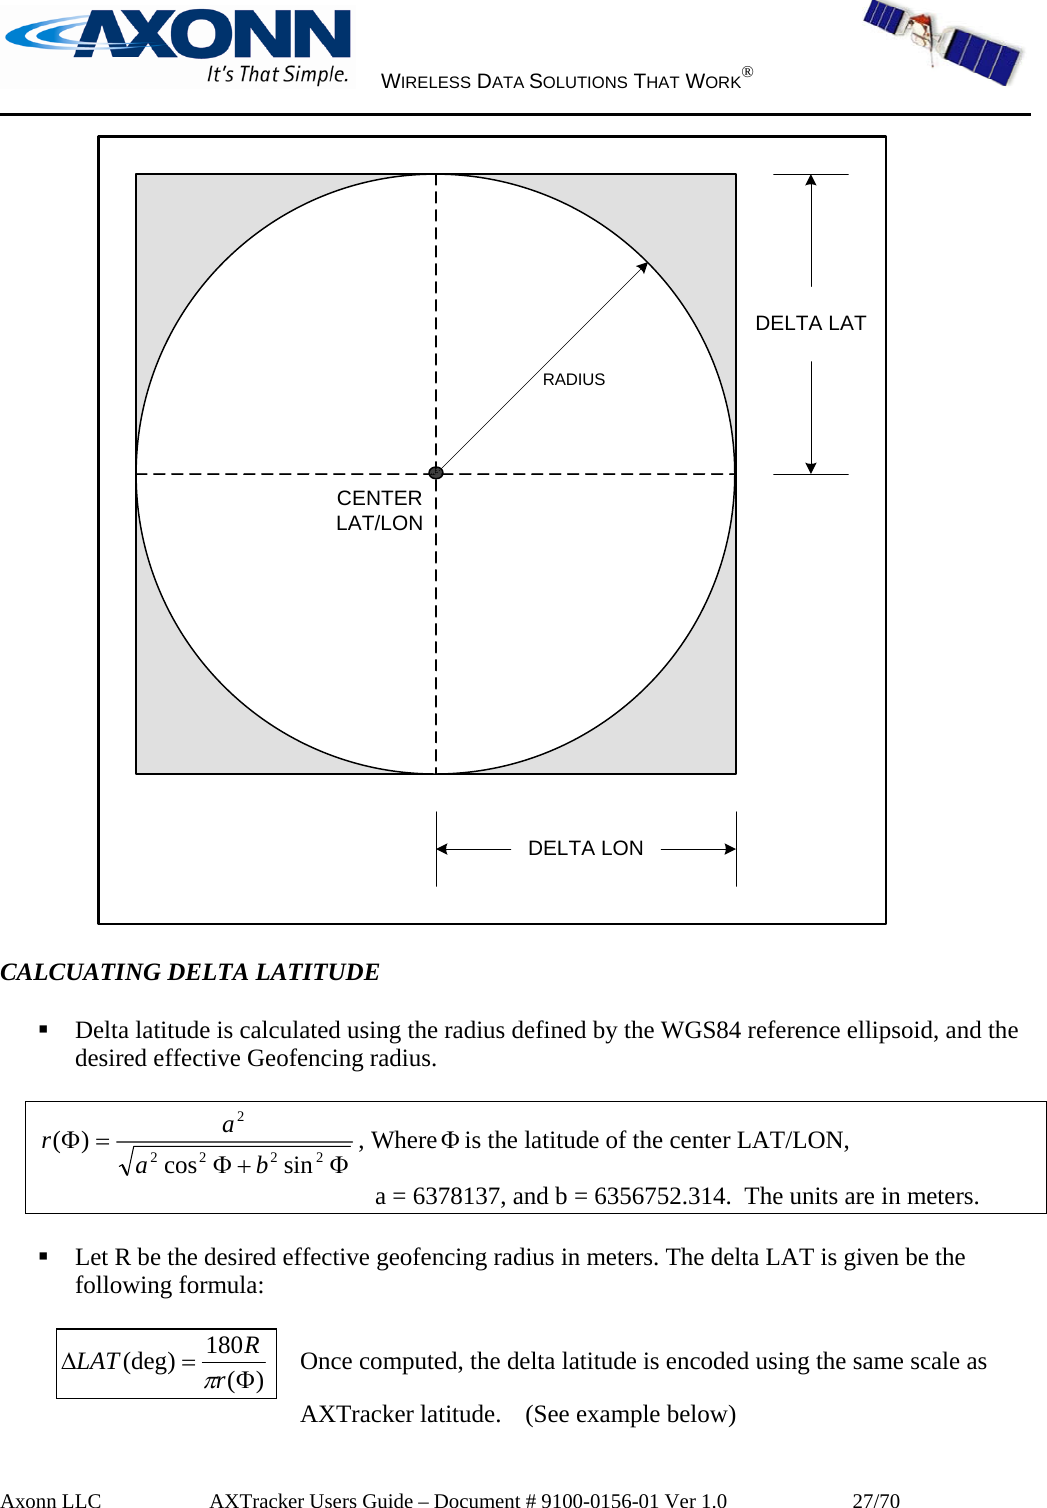     WIRELESS DATA SOLUTIONS THAT WORK®   Axonn LLC         AXTracker Users Guide – Document # 9100-0156-01 Ver 1.0                  27/70  CALCUATING DELTA LATITUDE   Delta latitude is calculated using the radius defined by the WGS84 reference ellipsoid, and the desired effective Geofencing radius.  Φ+Φ=Φ 22222sincos)( baar, WhereΦis the latitude of the center LAT/LON,                                                        a = 6378137, and b = 6356752.314.  The units are in meters.    Let R be the desired effective geofencing radius in meters. The delta LAT is given be the following formula:   )(180(deg) Φ=Δ rRLATπ    Once computed, the delta latitude is encoded using the same scale as AXTracker latitude.    (See example below)  DELTA LATDELTA LONCENTERLAT/LONRADIUS